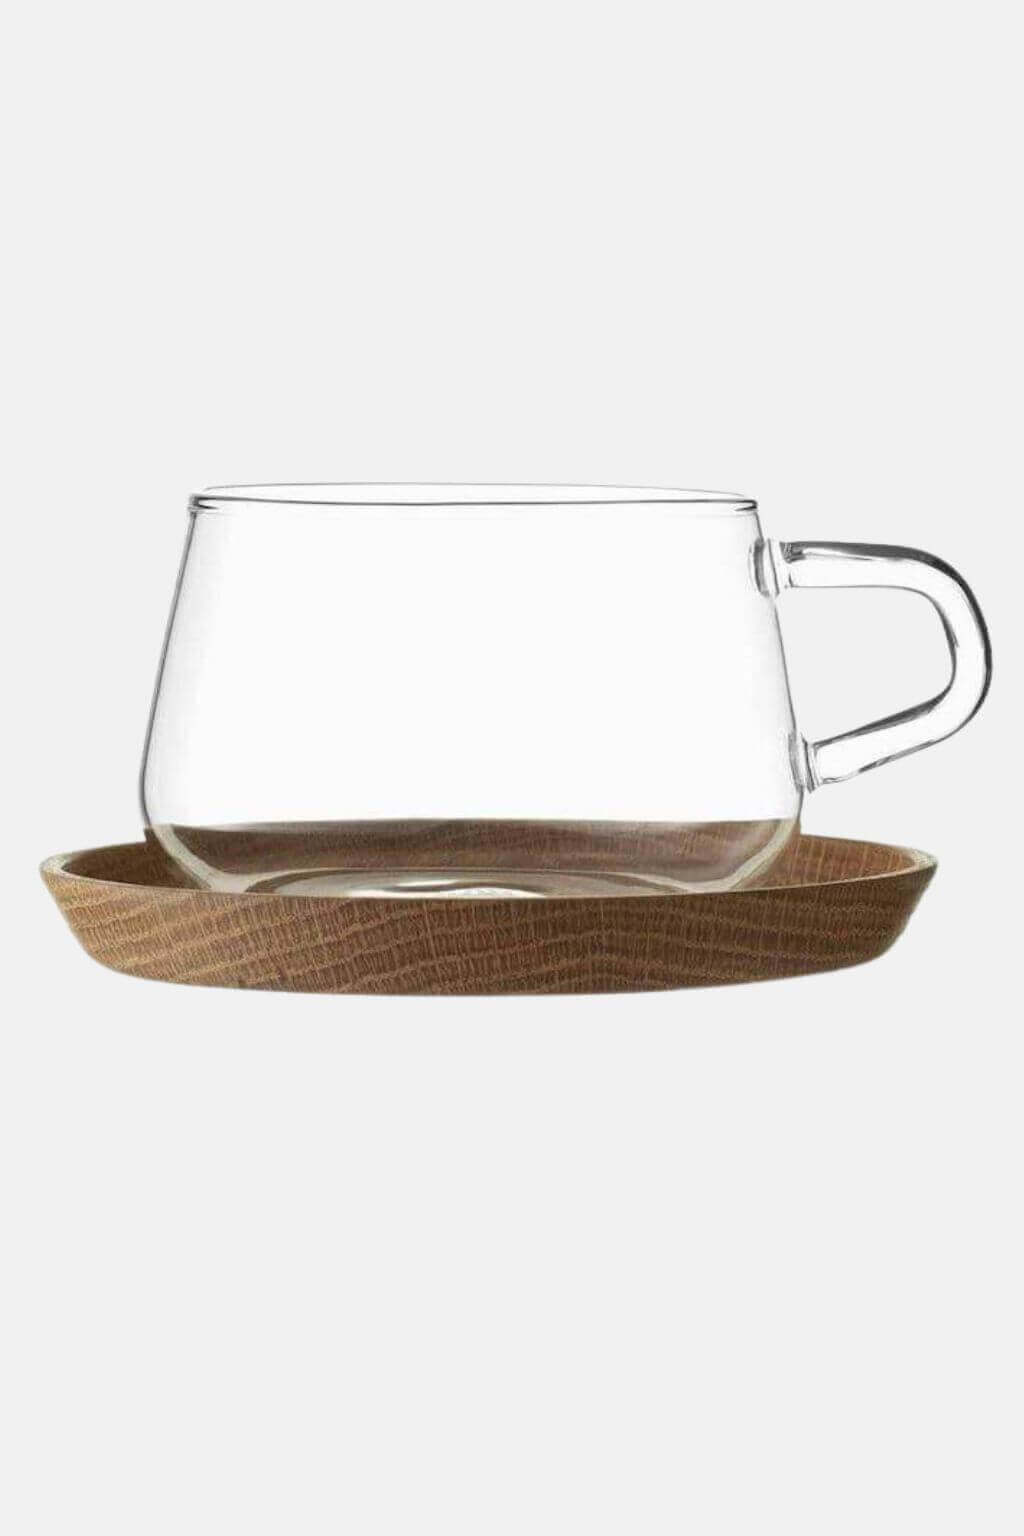 Purchase Wholesale glass cup bamboo lid. Free Returns & Net 60